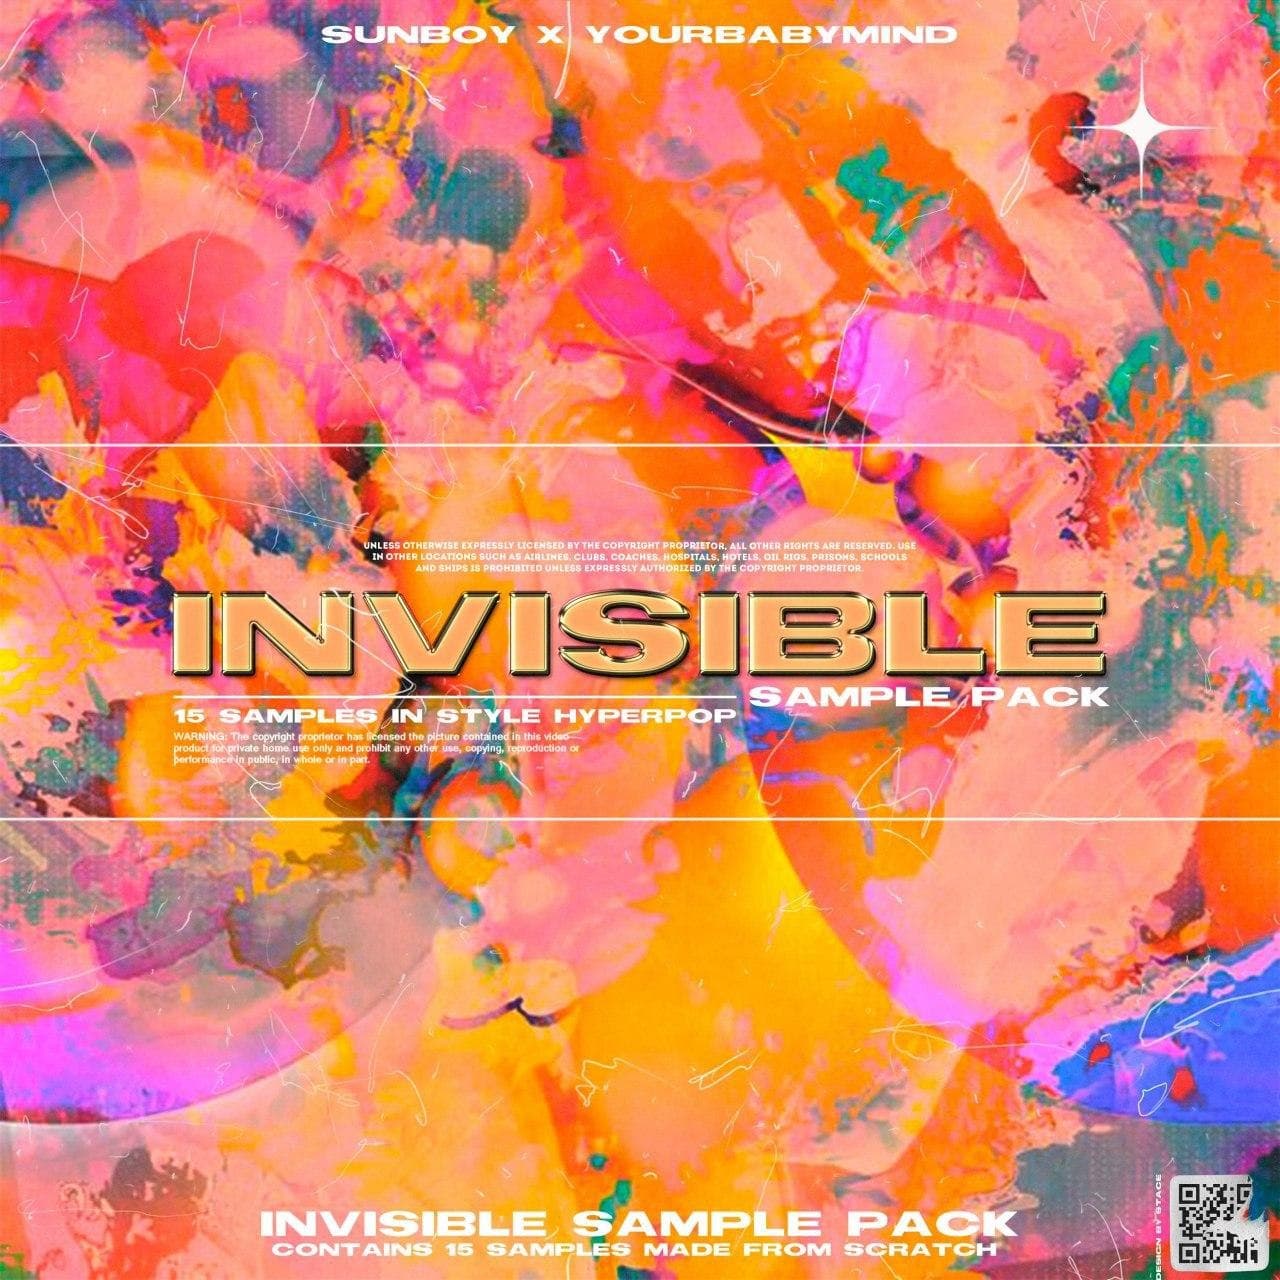 INVISIBLE SAMPLE PACK